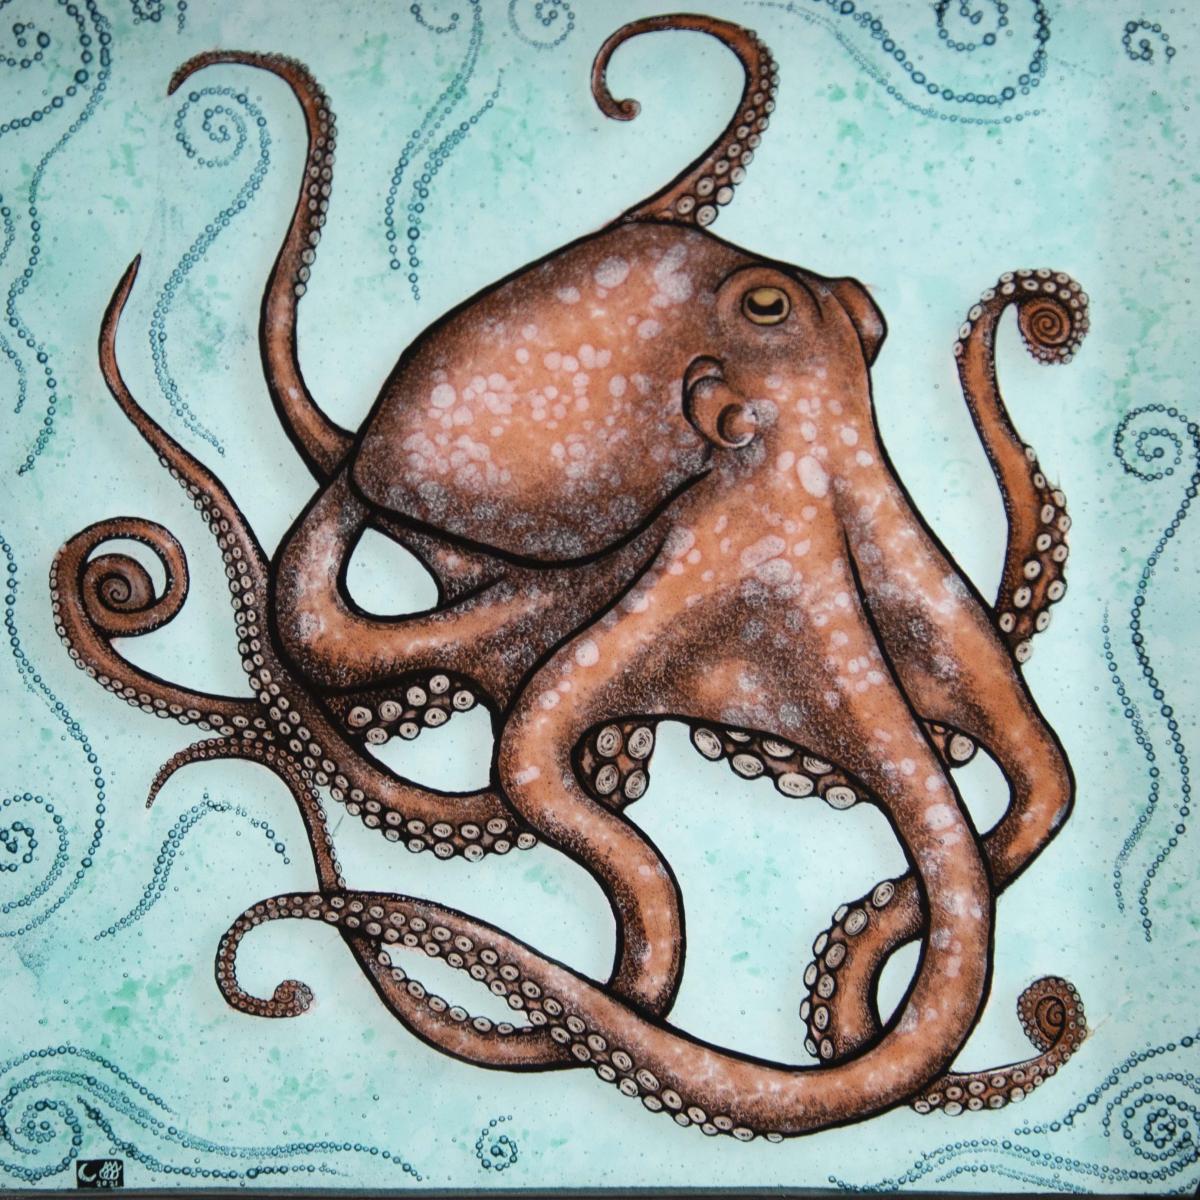 Photo of one of the exhibition panels showing an octopus on a blue background